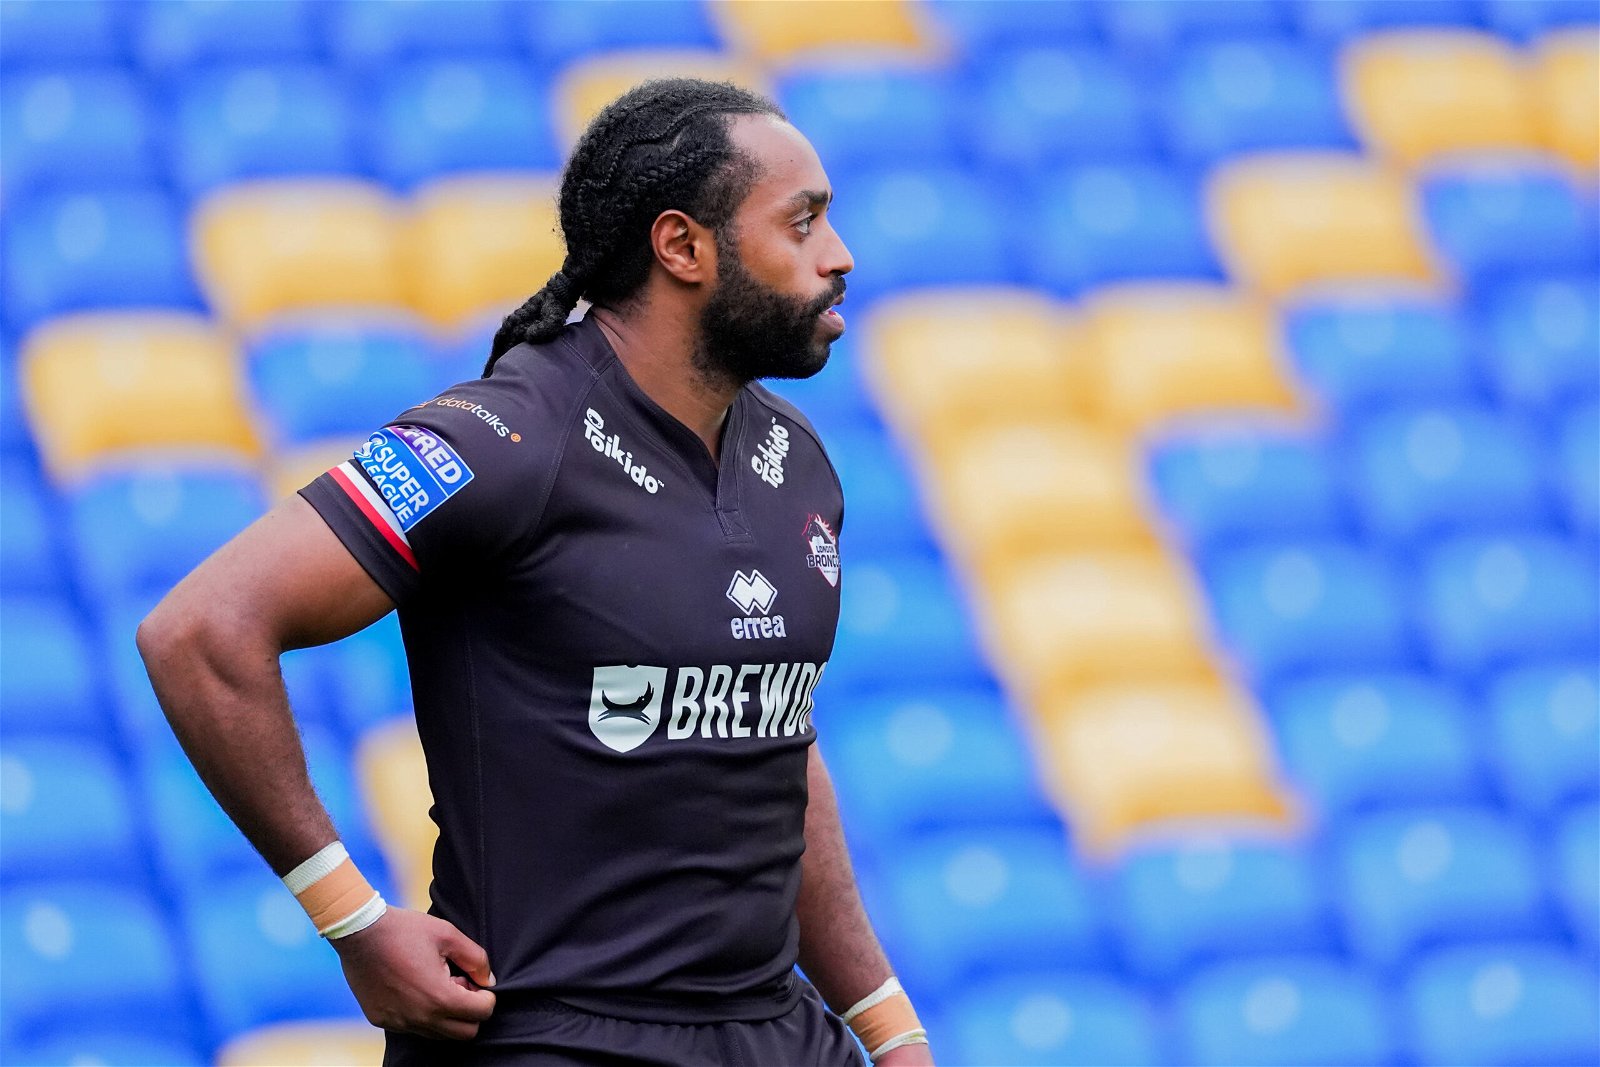 London Broncos' Iliess Macani looks to the side during Super League action.His shirt is a plain black one, with the club crest, the Brewdog logo as main sponsor, and barely legible sponsors by the collar.